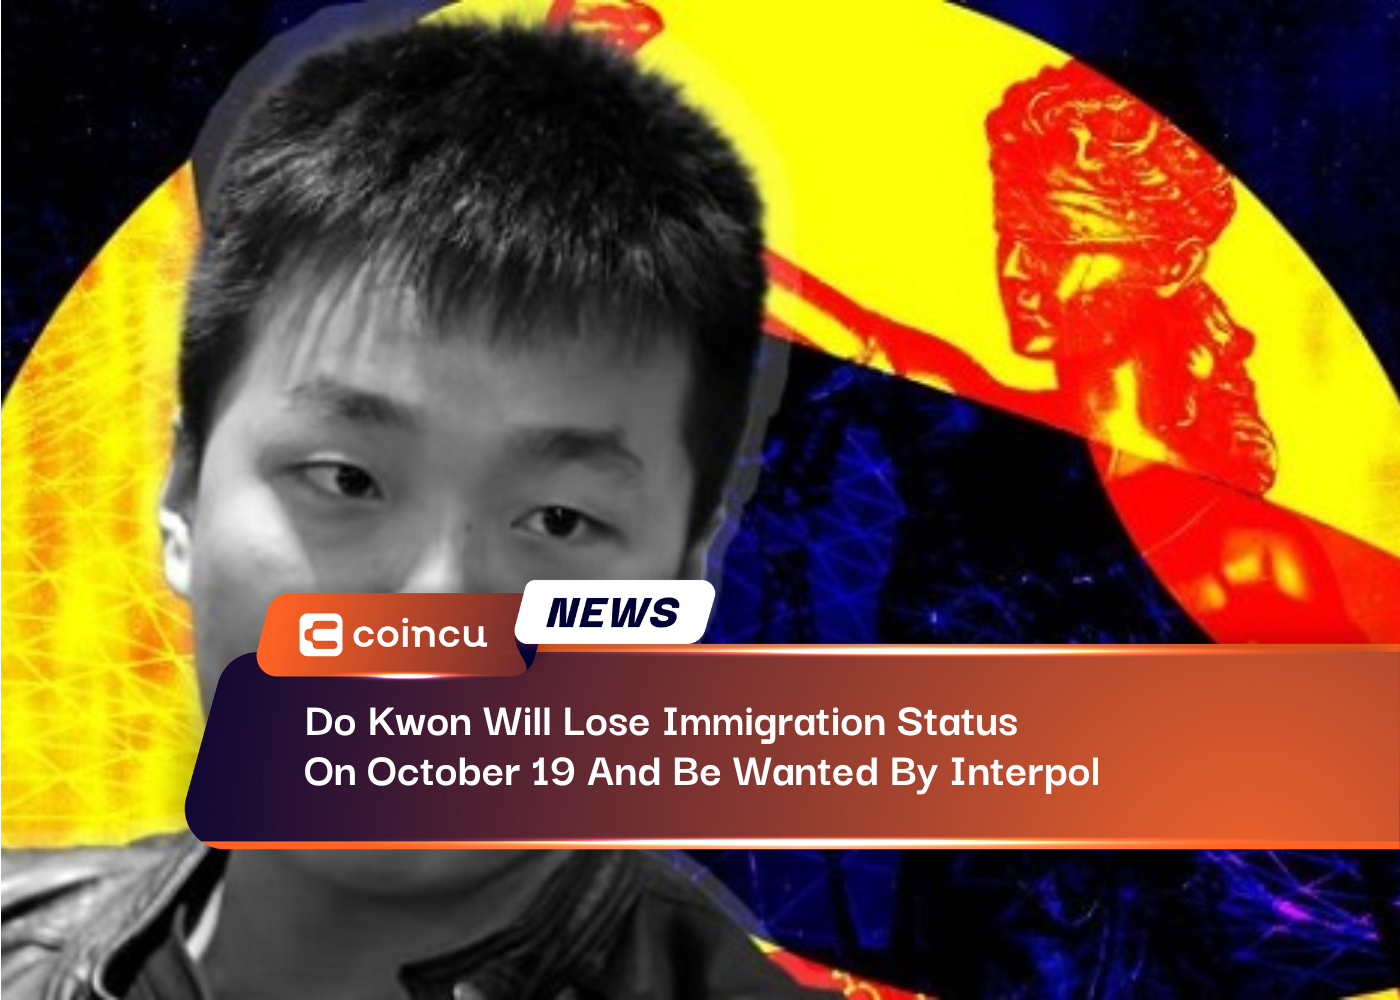 Do Kwon Will Lose Immigration Status On October 19 And Be Wanted By Interpol